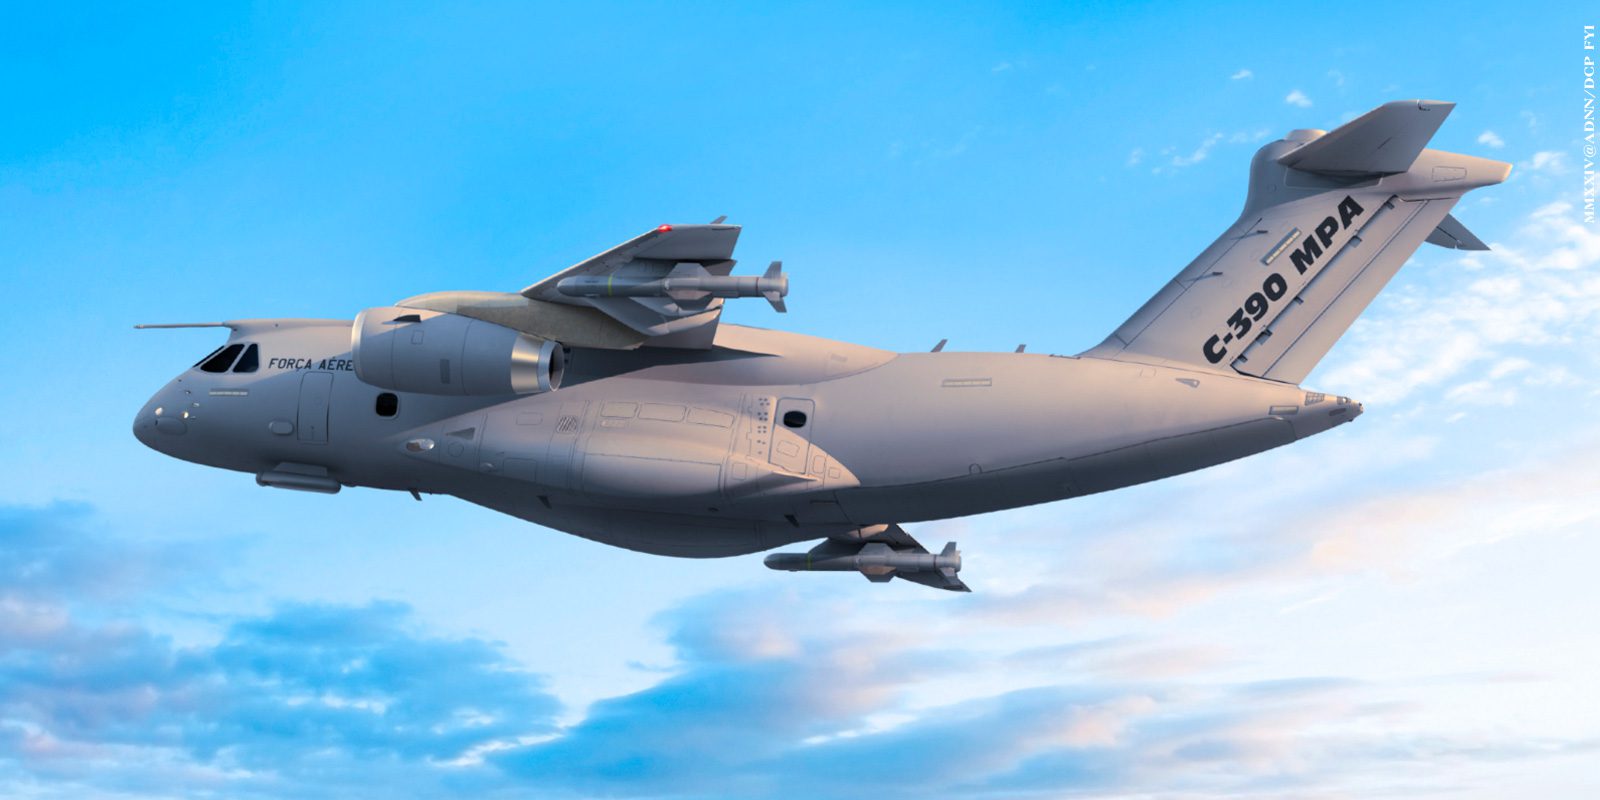 Photo: version, specialized as a maritime patrol aircraft, is part of Embraer's plan to expand the role of the C-390 into an ISR platform, called the C-390 MPA.